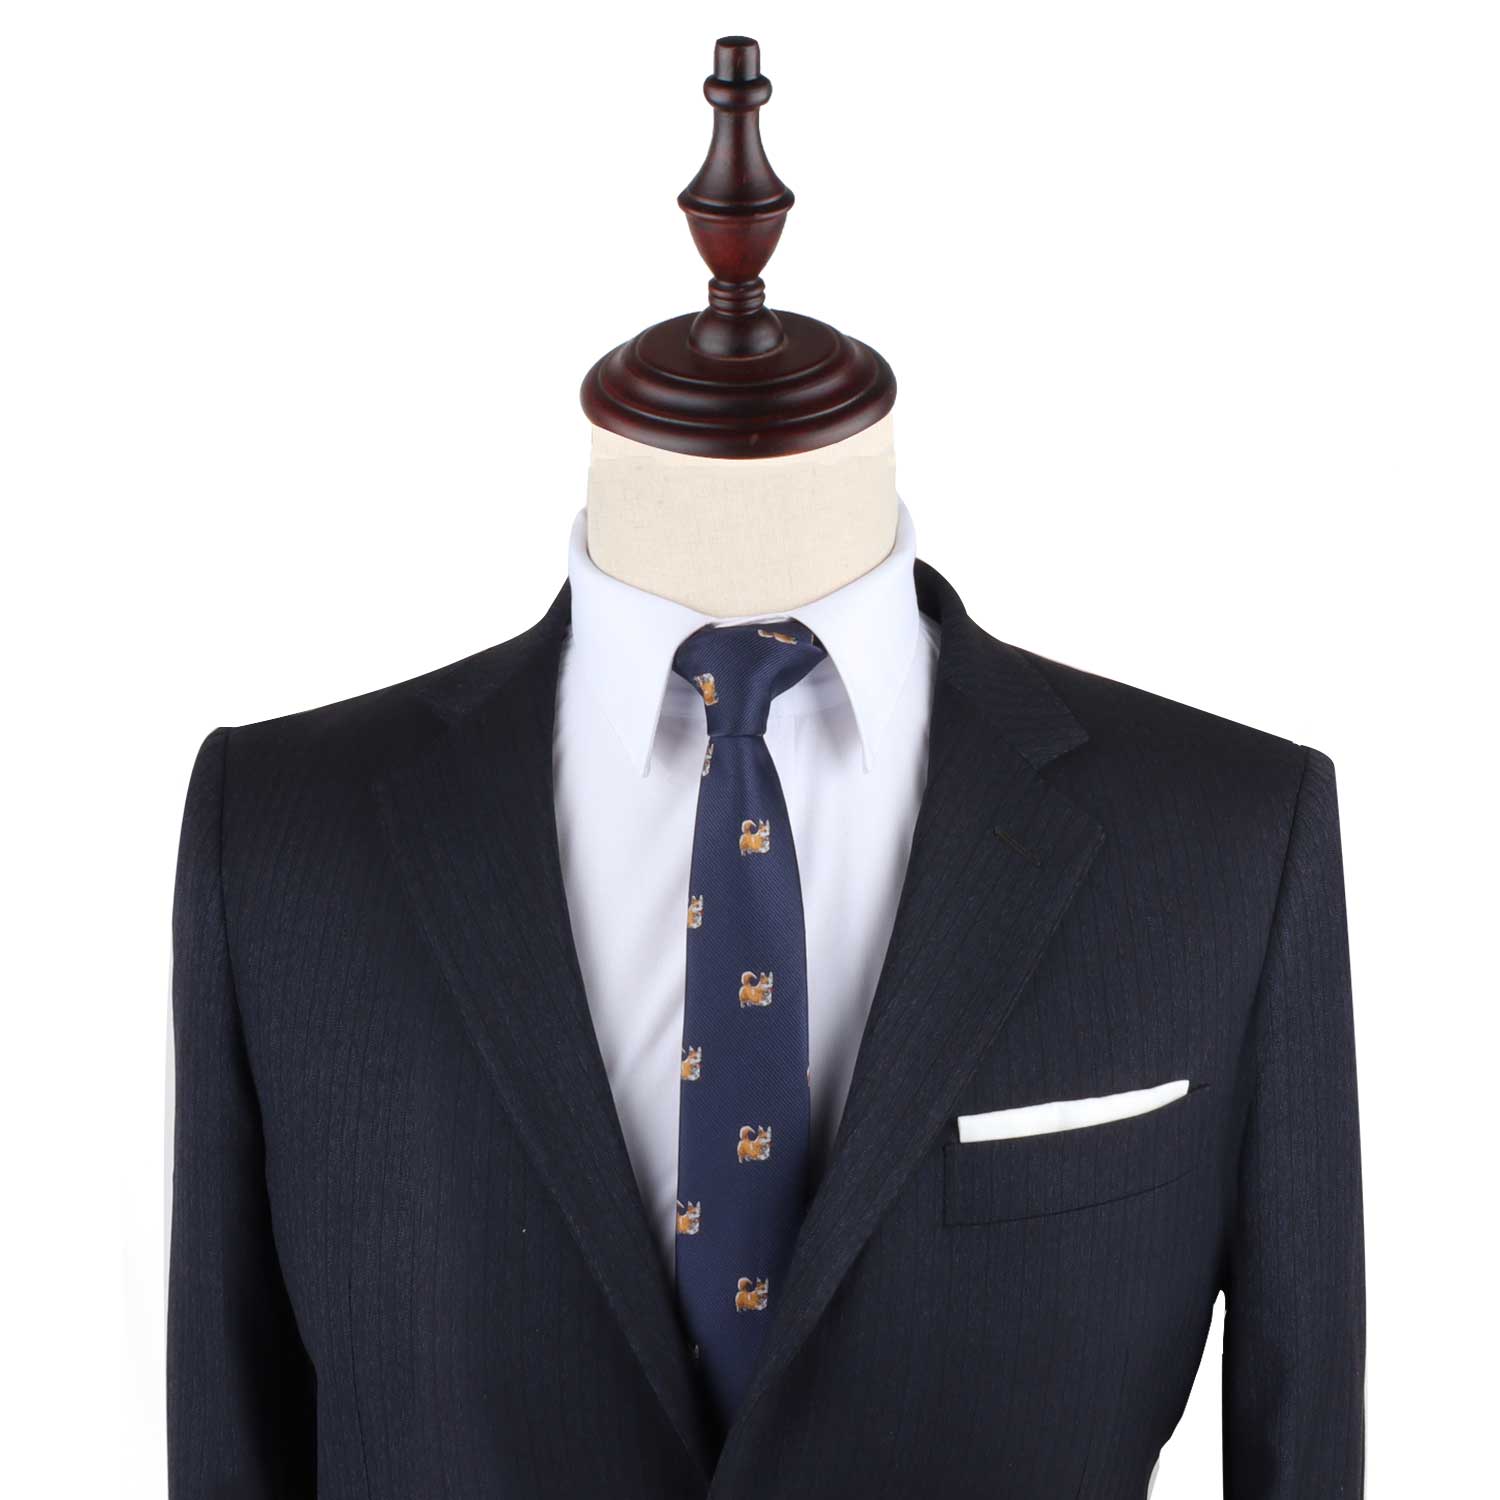 A mannequin displaying a Corgi Dog Skinny Tie with charm.